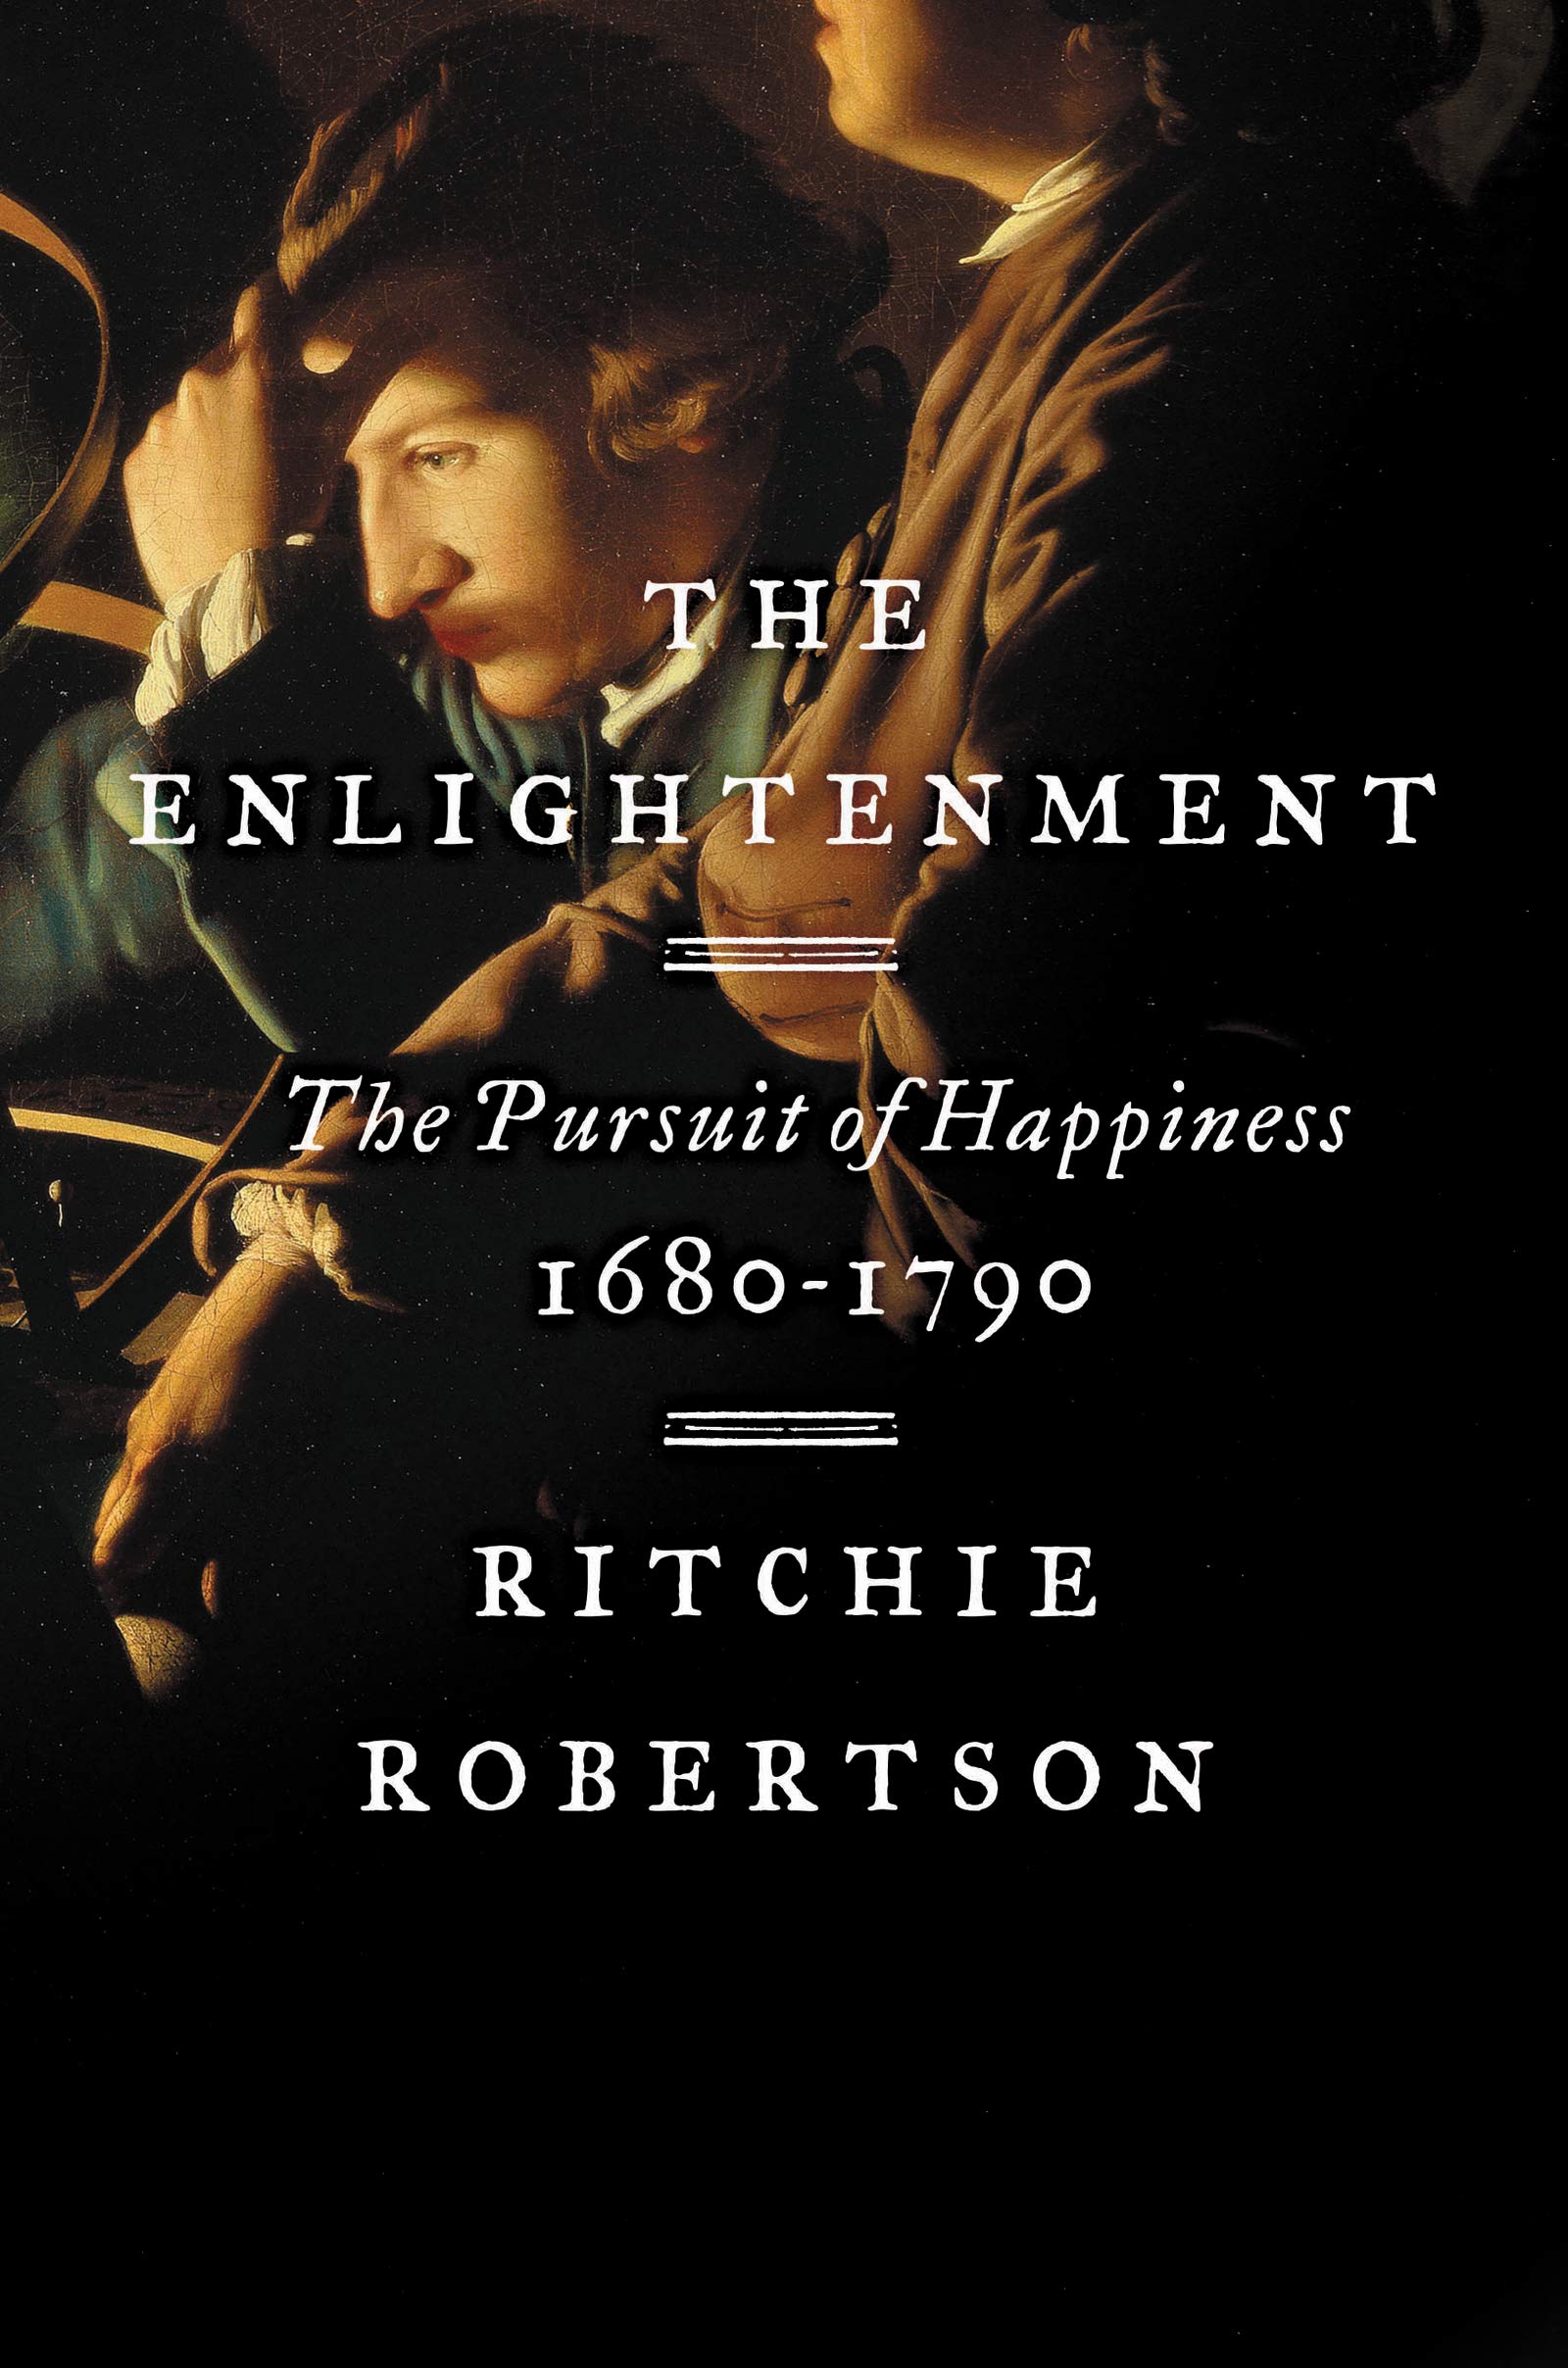 Ritchie Robertson Hardback The Enlightenment The Pursuit of Happiness 1680-1790